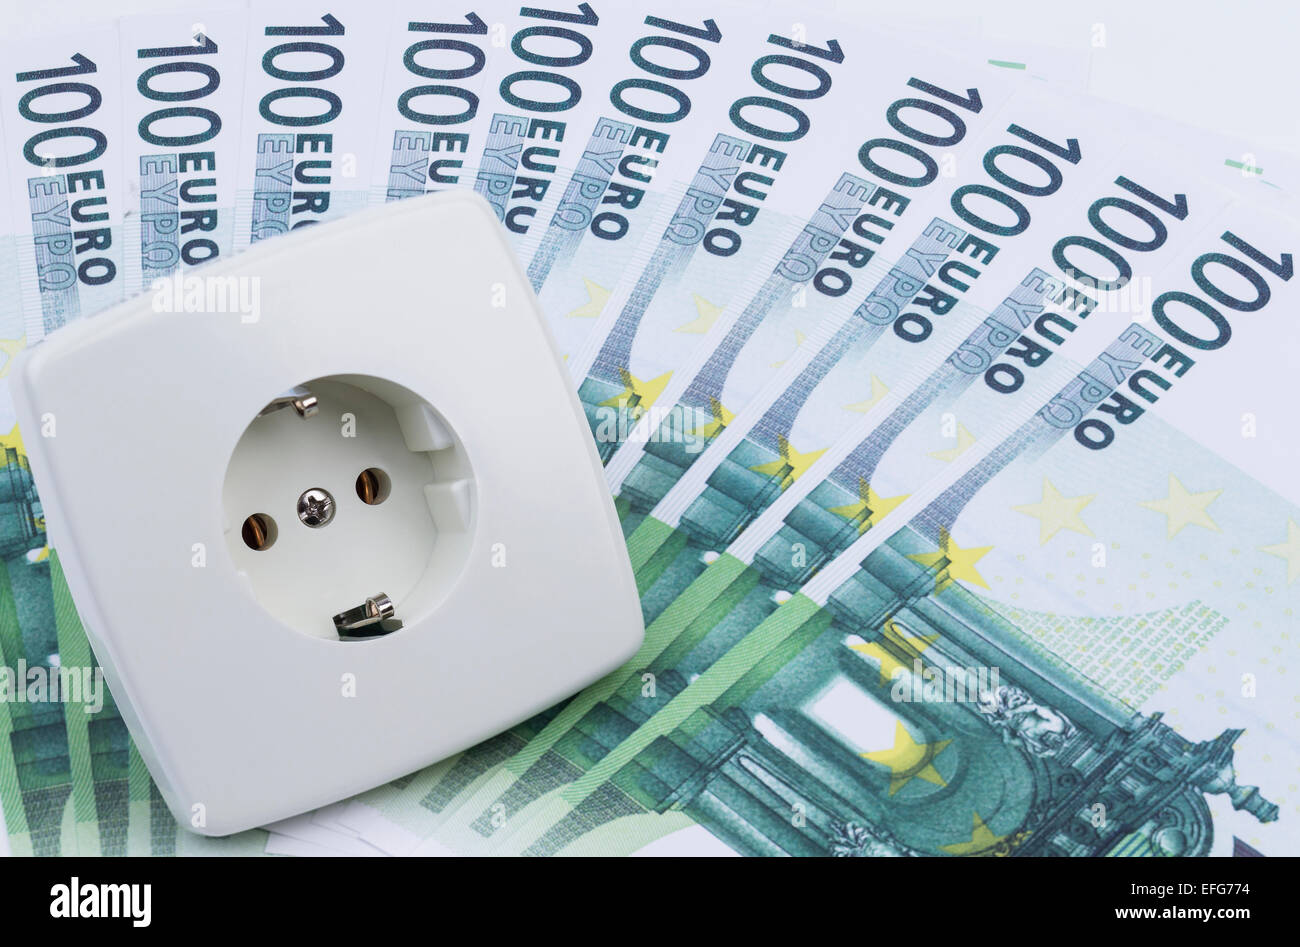 Image shows a white power socket with some banknotes Stock Photo